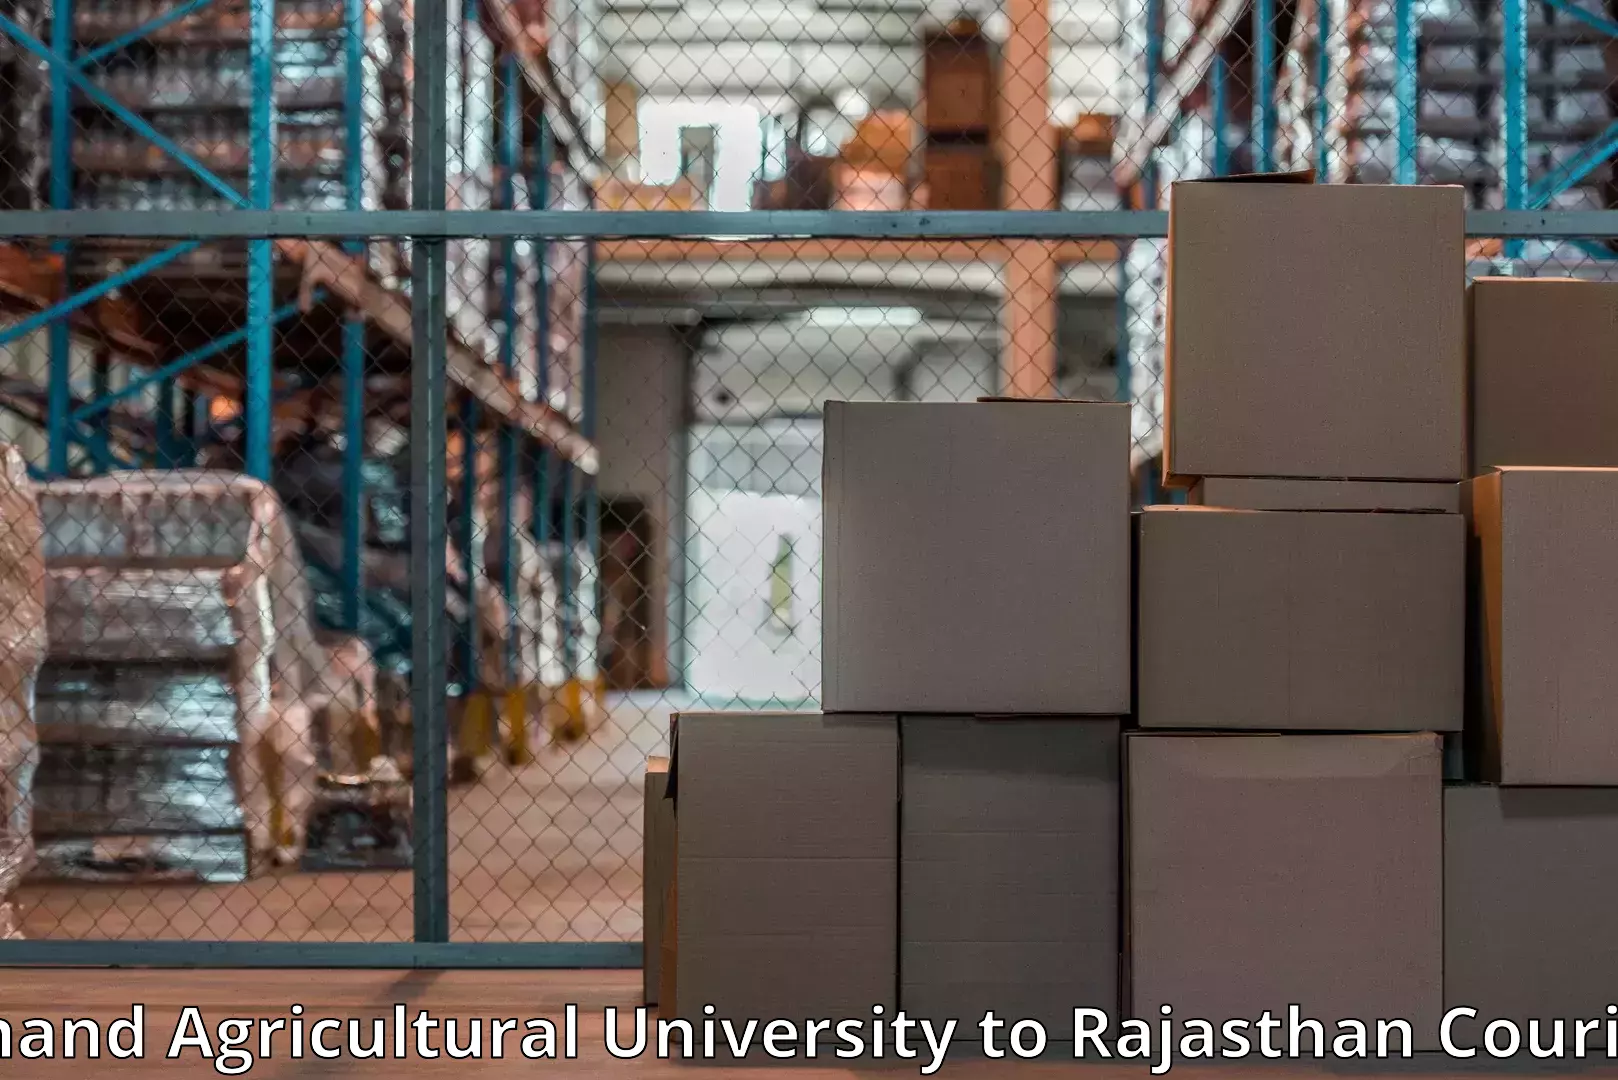 Furniture moving assistance Anand Agricultural University to Dholpur